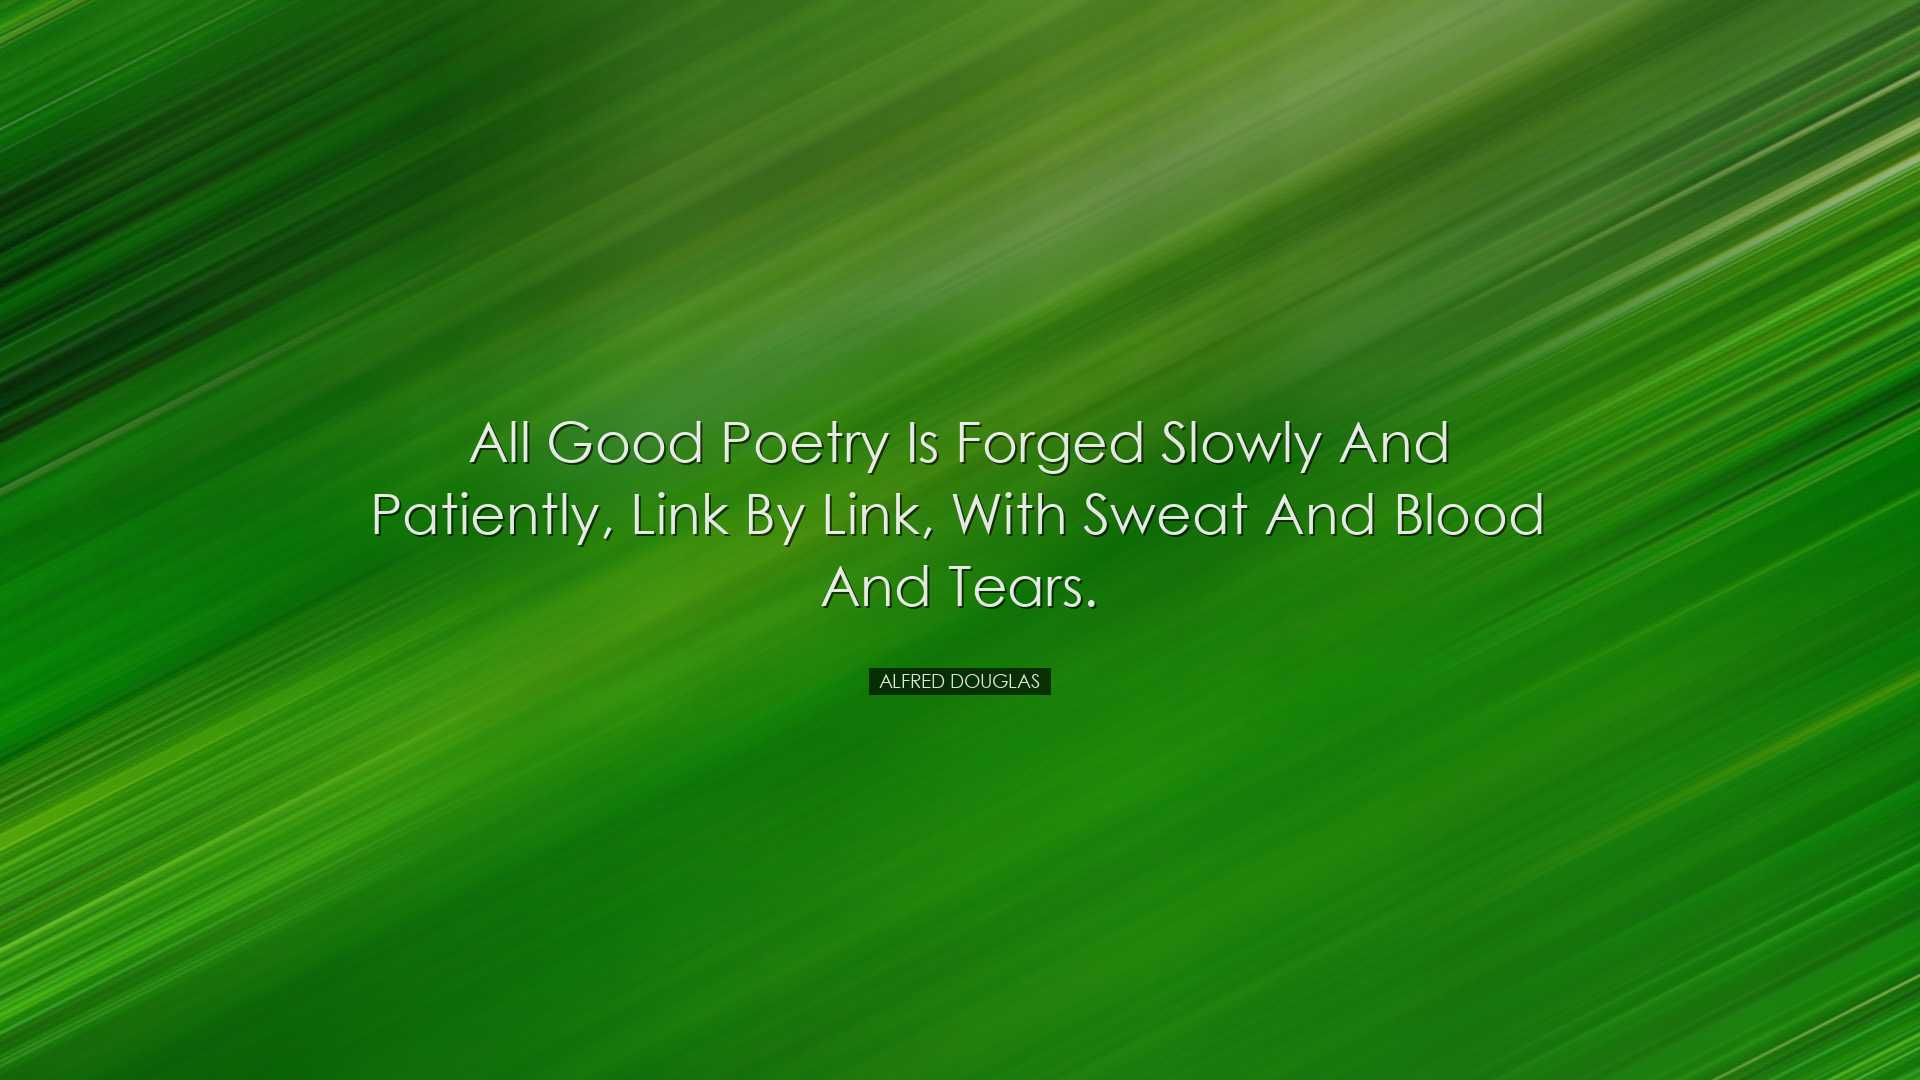 All good poetry is forged slowly and patiently, link by link, with